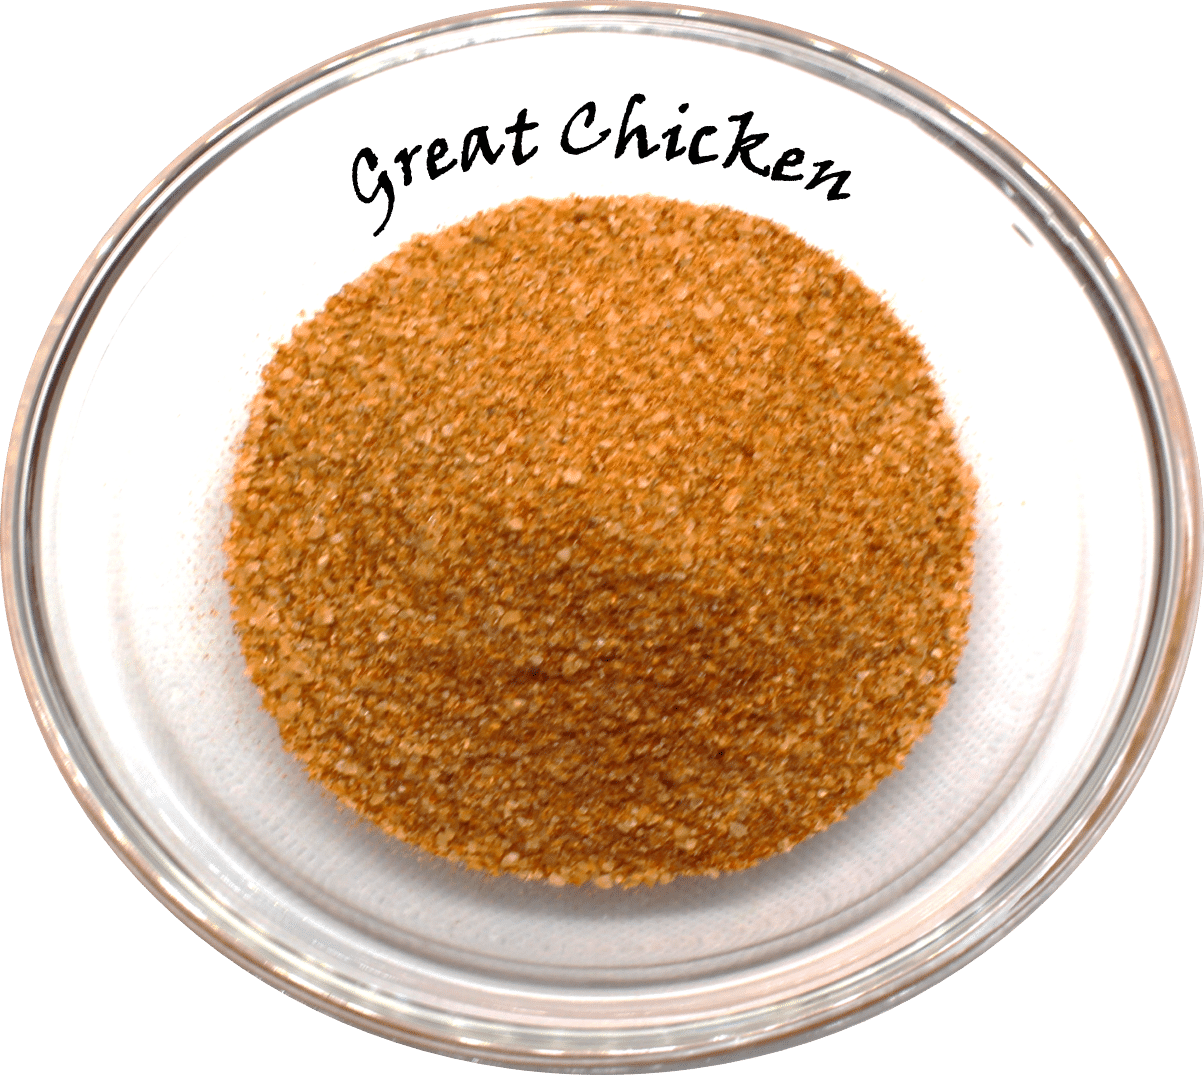 Great chicken no logo <u><b>Great Chicken 200g - </b></u><u><b>Crown National Spices</b></u> <div><b>The one and only Crown National Great Chicken Spice is the perfect way to add flavour to your roasted, BBQ or Rotisserie Chicken. </b></div> <div><b>Authentic Southern African Spices and Seasonings imported from the most southern tip of the African continent. </b></div> <div><b>These spices and seasonings have a proud heritage that dates back to 1912. </b></div> <div><b>A unique taste and finest level of quality in every pack.  </b></div> <div> Size: 200g Handipak <div><u><b>Description: </b></u></div> <div>A delicious BBQ flavour with cayenne pepper notes when sprinkled on chicken prior to roasting, braaing or cooking.</div> <div></div> <div><b><u>Ingredients: </u></b></div> <div>Salt, Cereal (<b>Wheat Gluten</b>), Spices (<b>Celery</b>), Sugar, Dehydrated Vegetable (Garlic)</div> <div><b><u> </u></b></div> <div><b><u>Allergens: </u></b></div> <div><b>Gluten & Celery</b></div> <div><b> </b></div> <div><b>Produced in a factory where Cow's Milk, Egg, Mustard, Soy, Wheat Gluten are used.</b></div> </div>